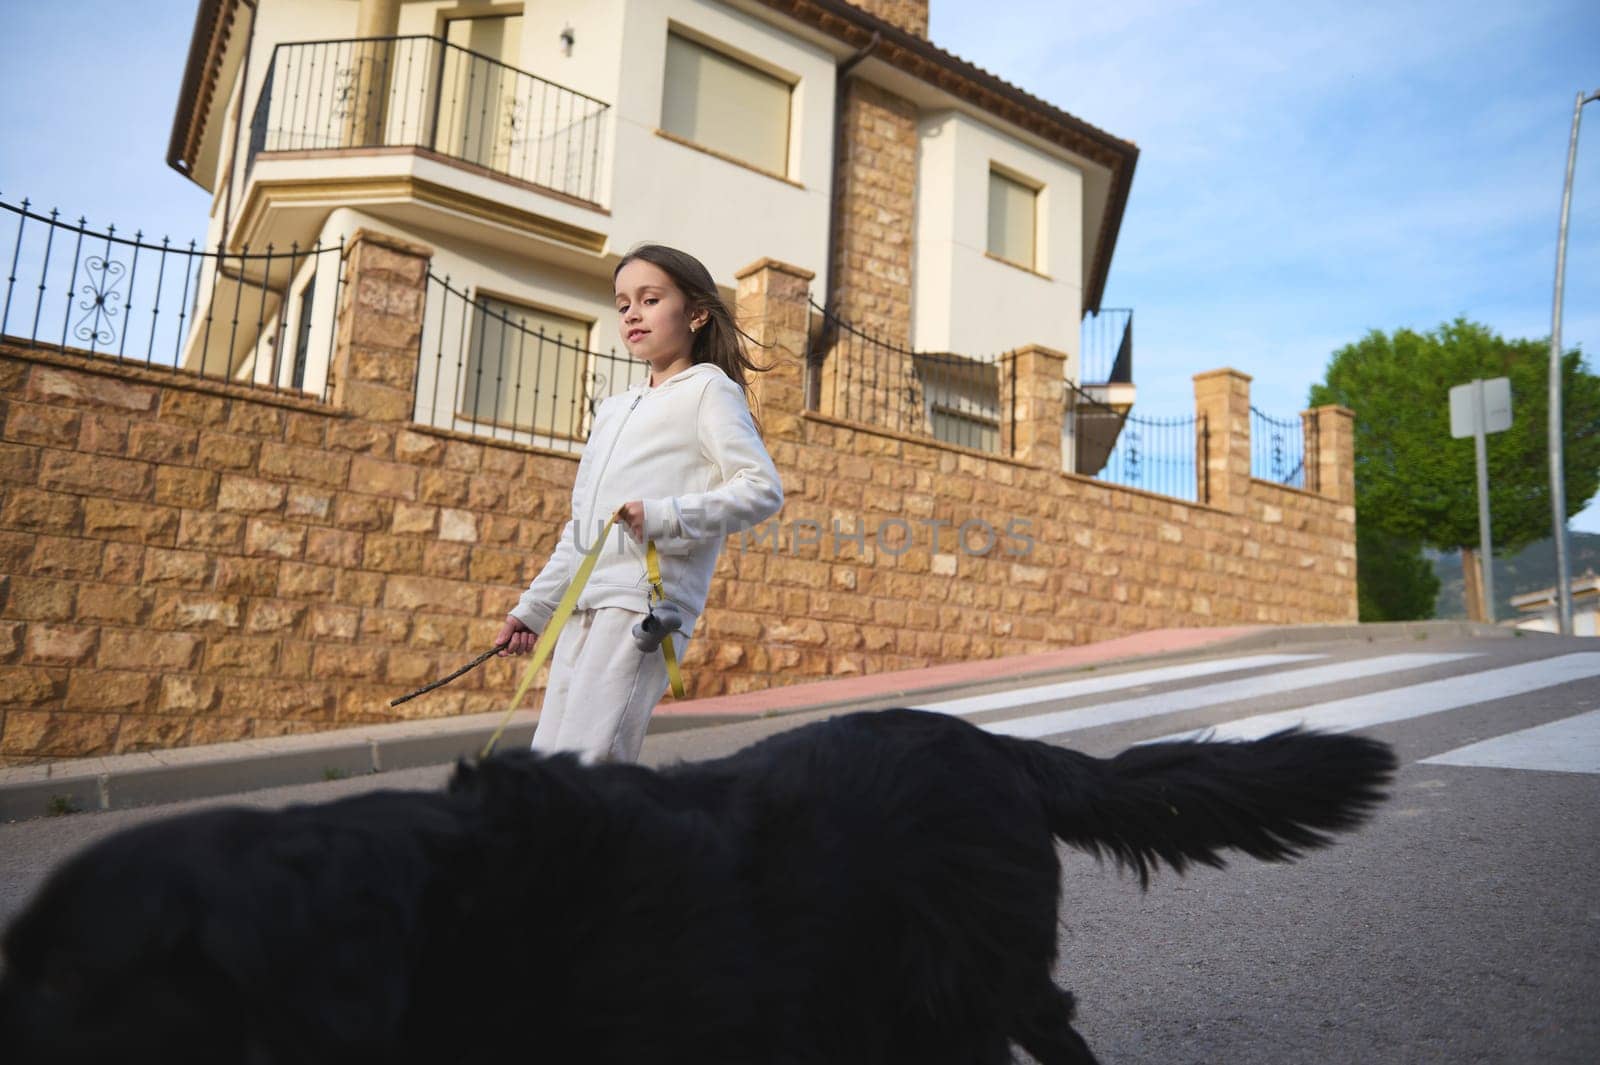 Little kid girl walking her dog on the city street. Adorable kid enjoying spending time with her pedigree purebred cocker spaniel, have with with her pet outdoors. Playing pets and people concept by artgf